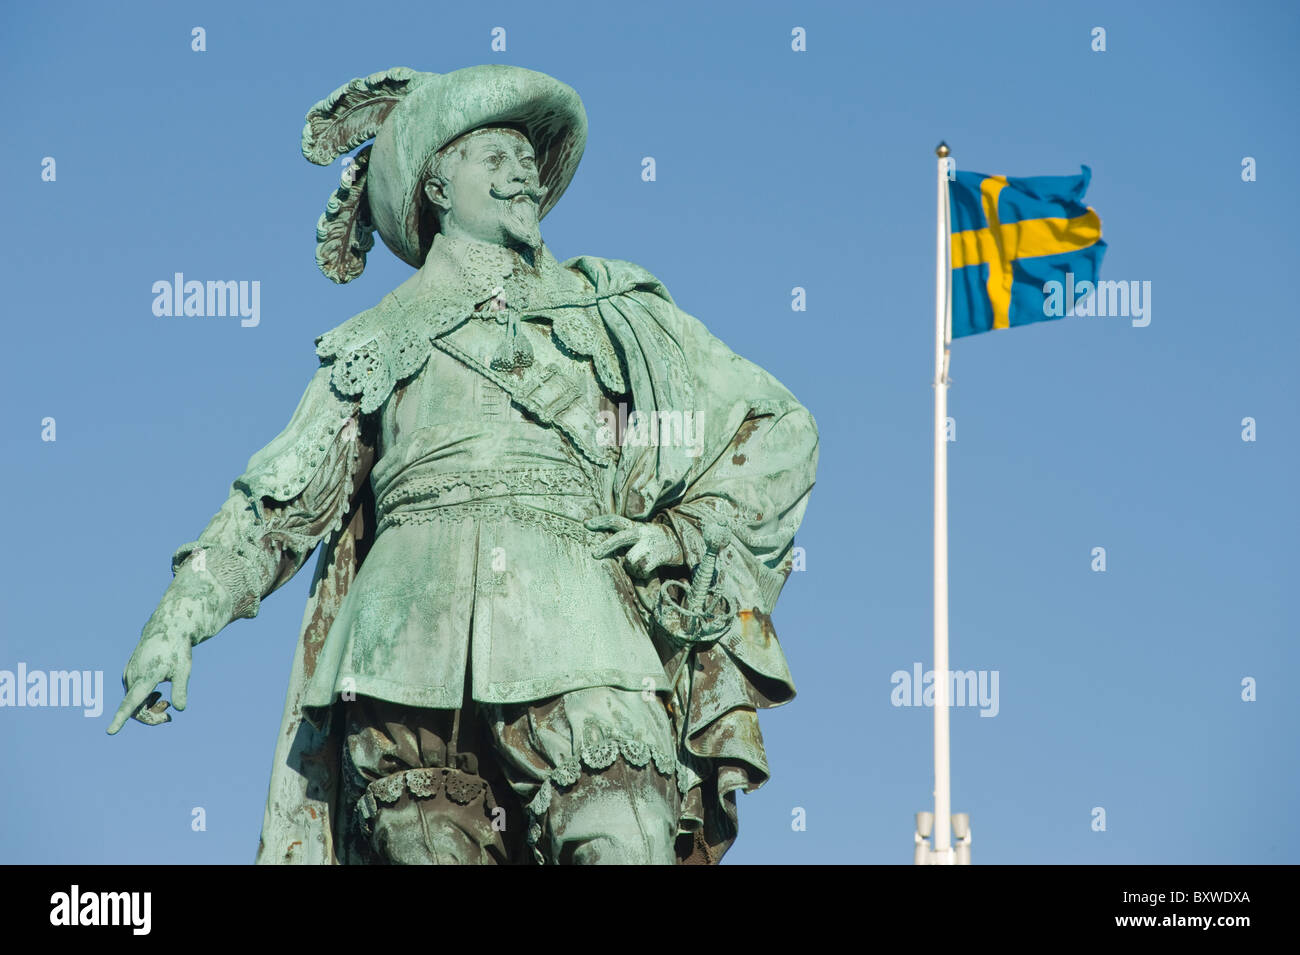 Statue of King Gustavus Adolphus of Sweden, in Gustavus Adolphus Square, with the Swedish national flag, Gothenburg, Sweden. Stock Photo